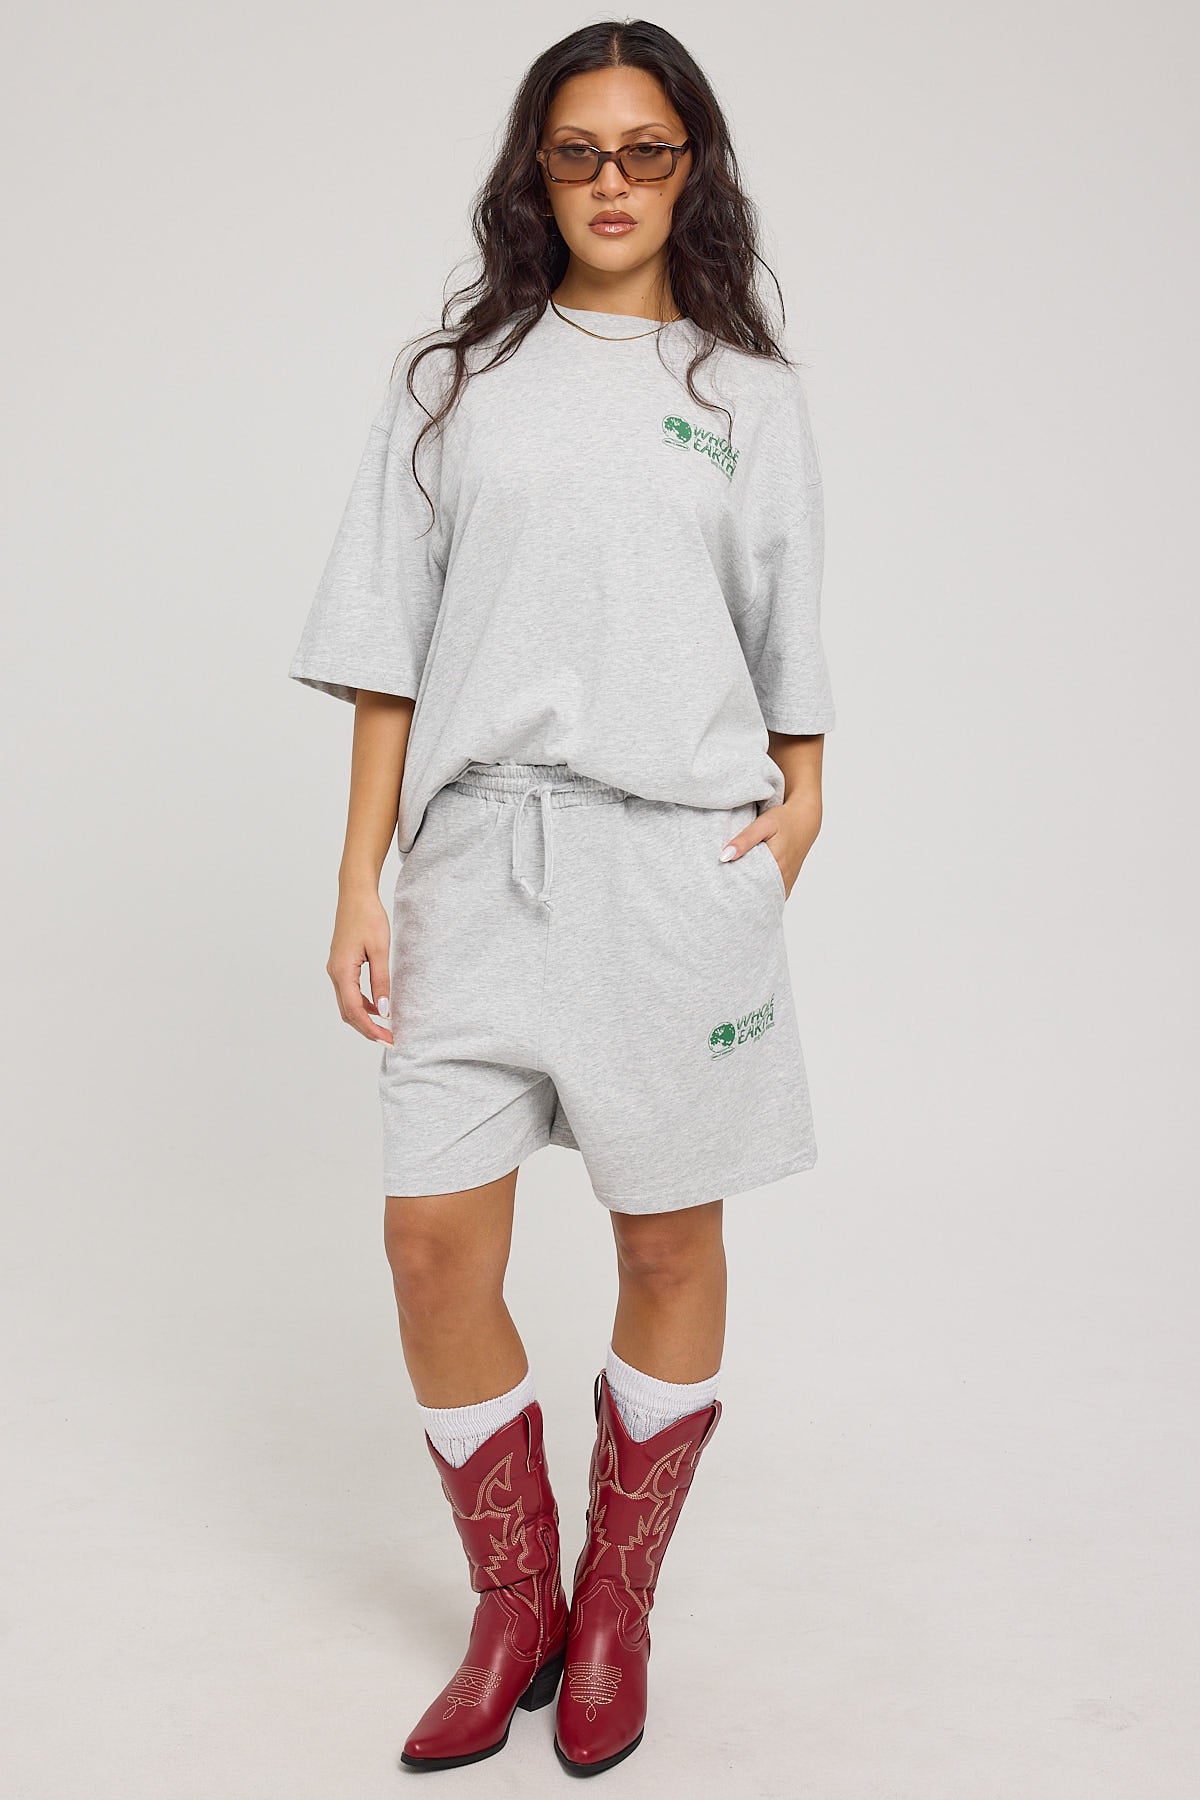 Thrills Special Offer Oversized Tee Snow Marle